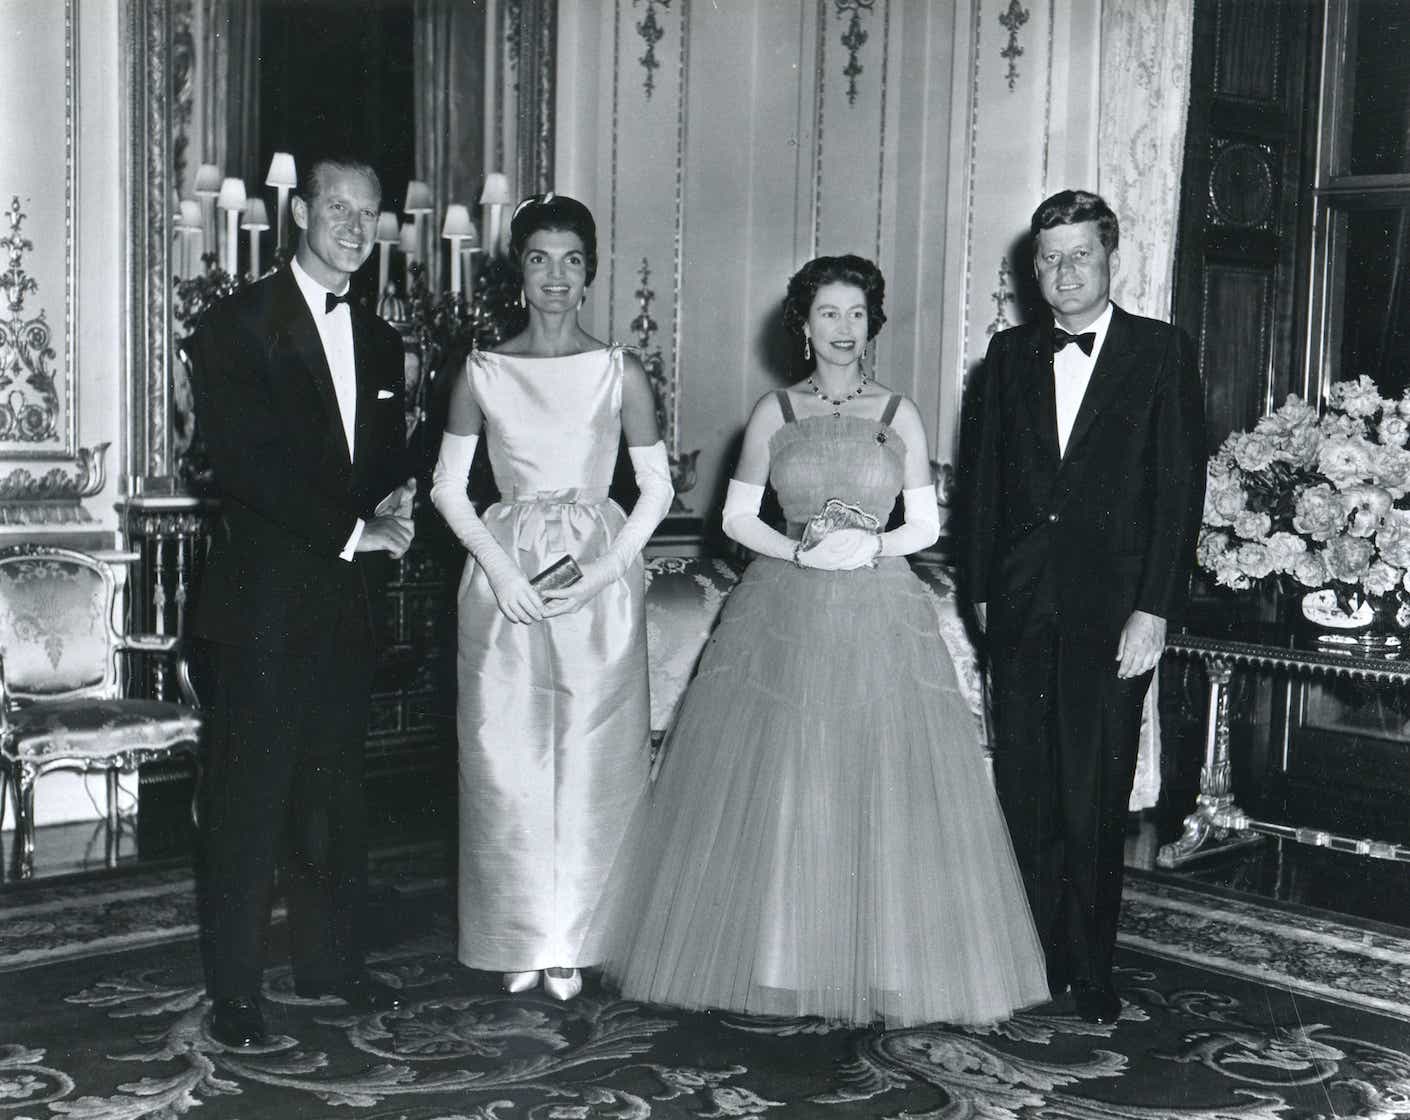 President and Mrs. Kennedy pose with Queen Elizabeth and Prince Philip before the Queen's dinner honoring the Kennedys at Buckingham Palace during the President's 1961 visit. All wear formal dress.